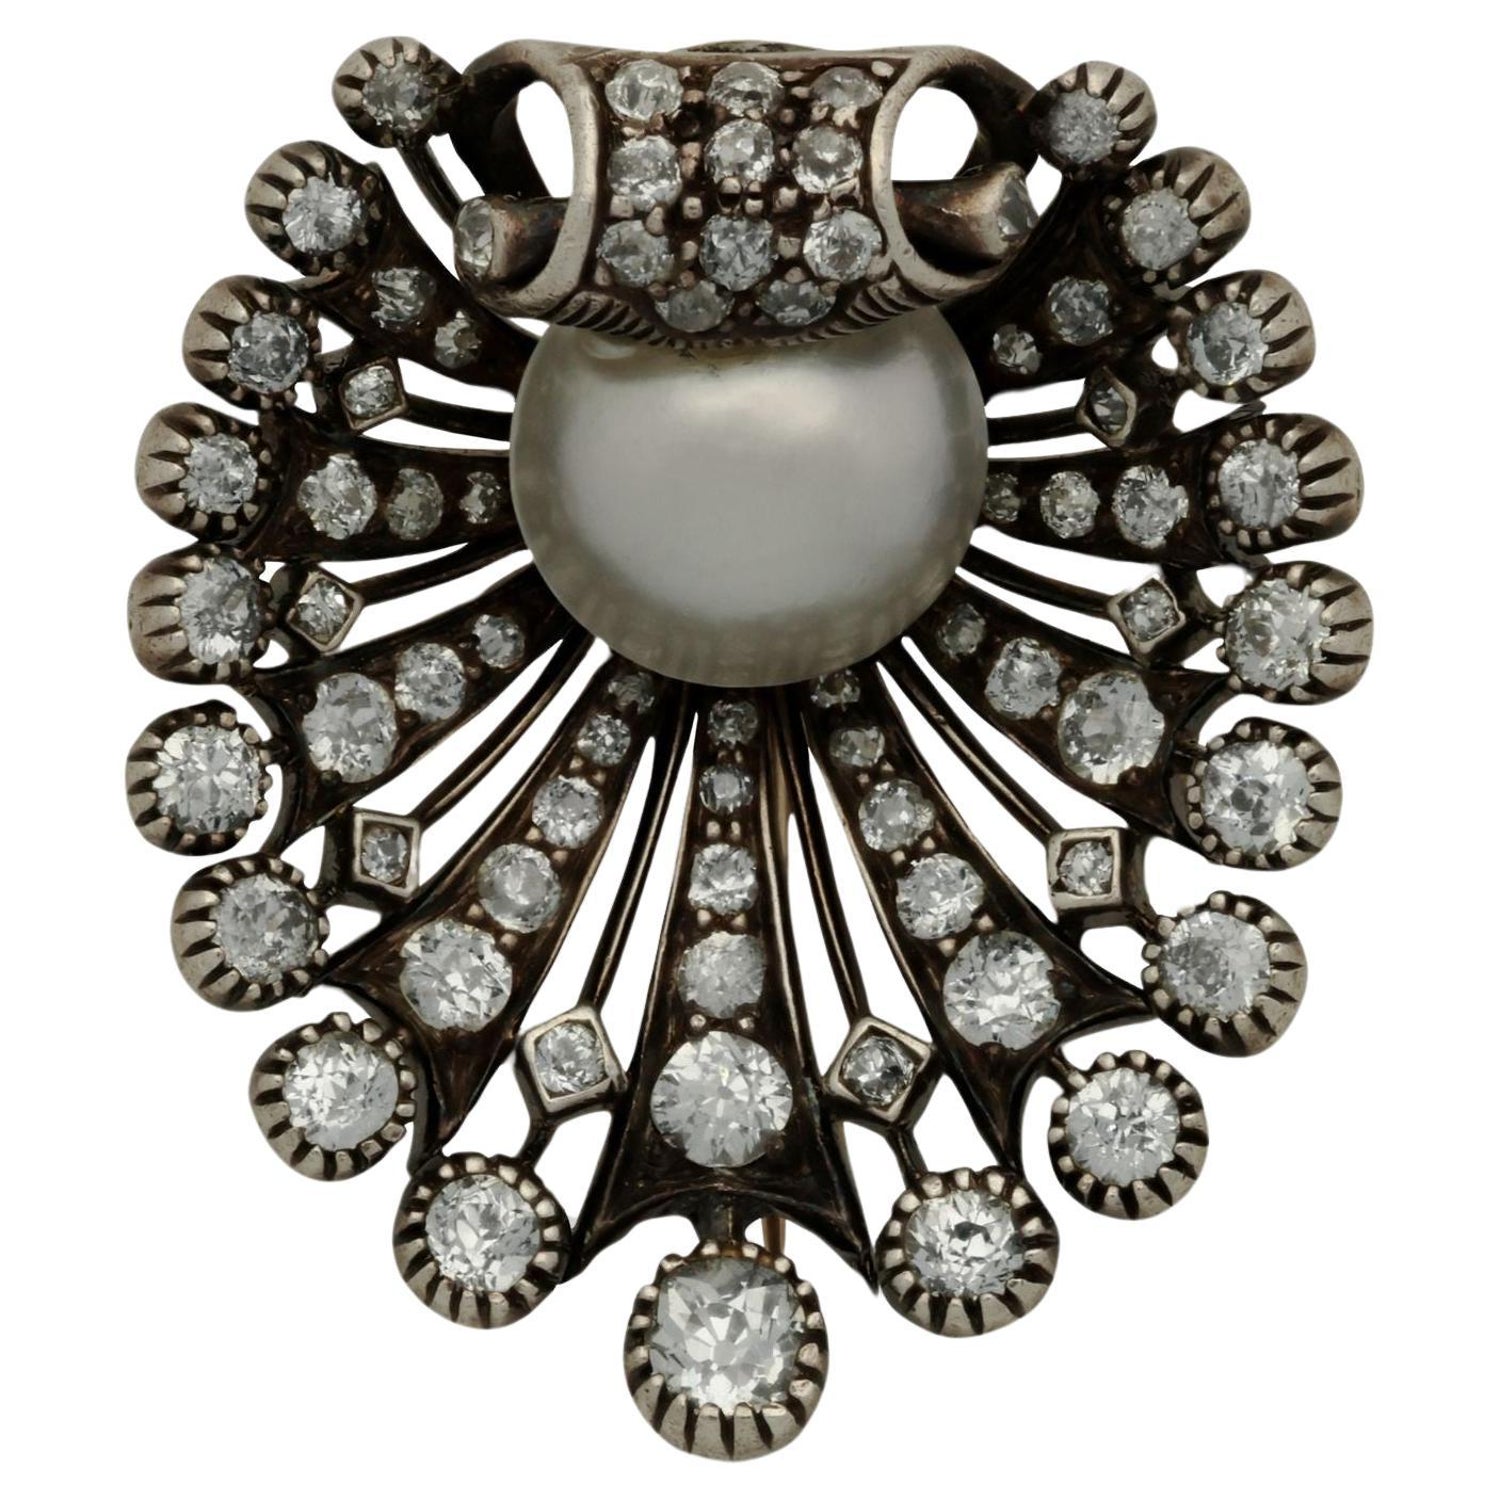 Antique Men's Brooches to Elevate Any Outfit - Only Natural Diamonds